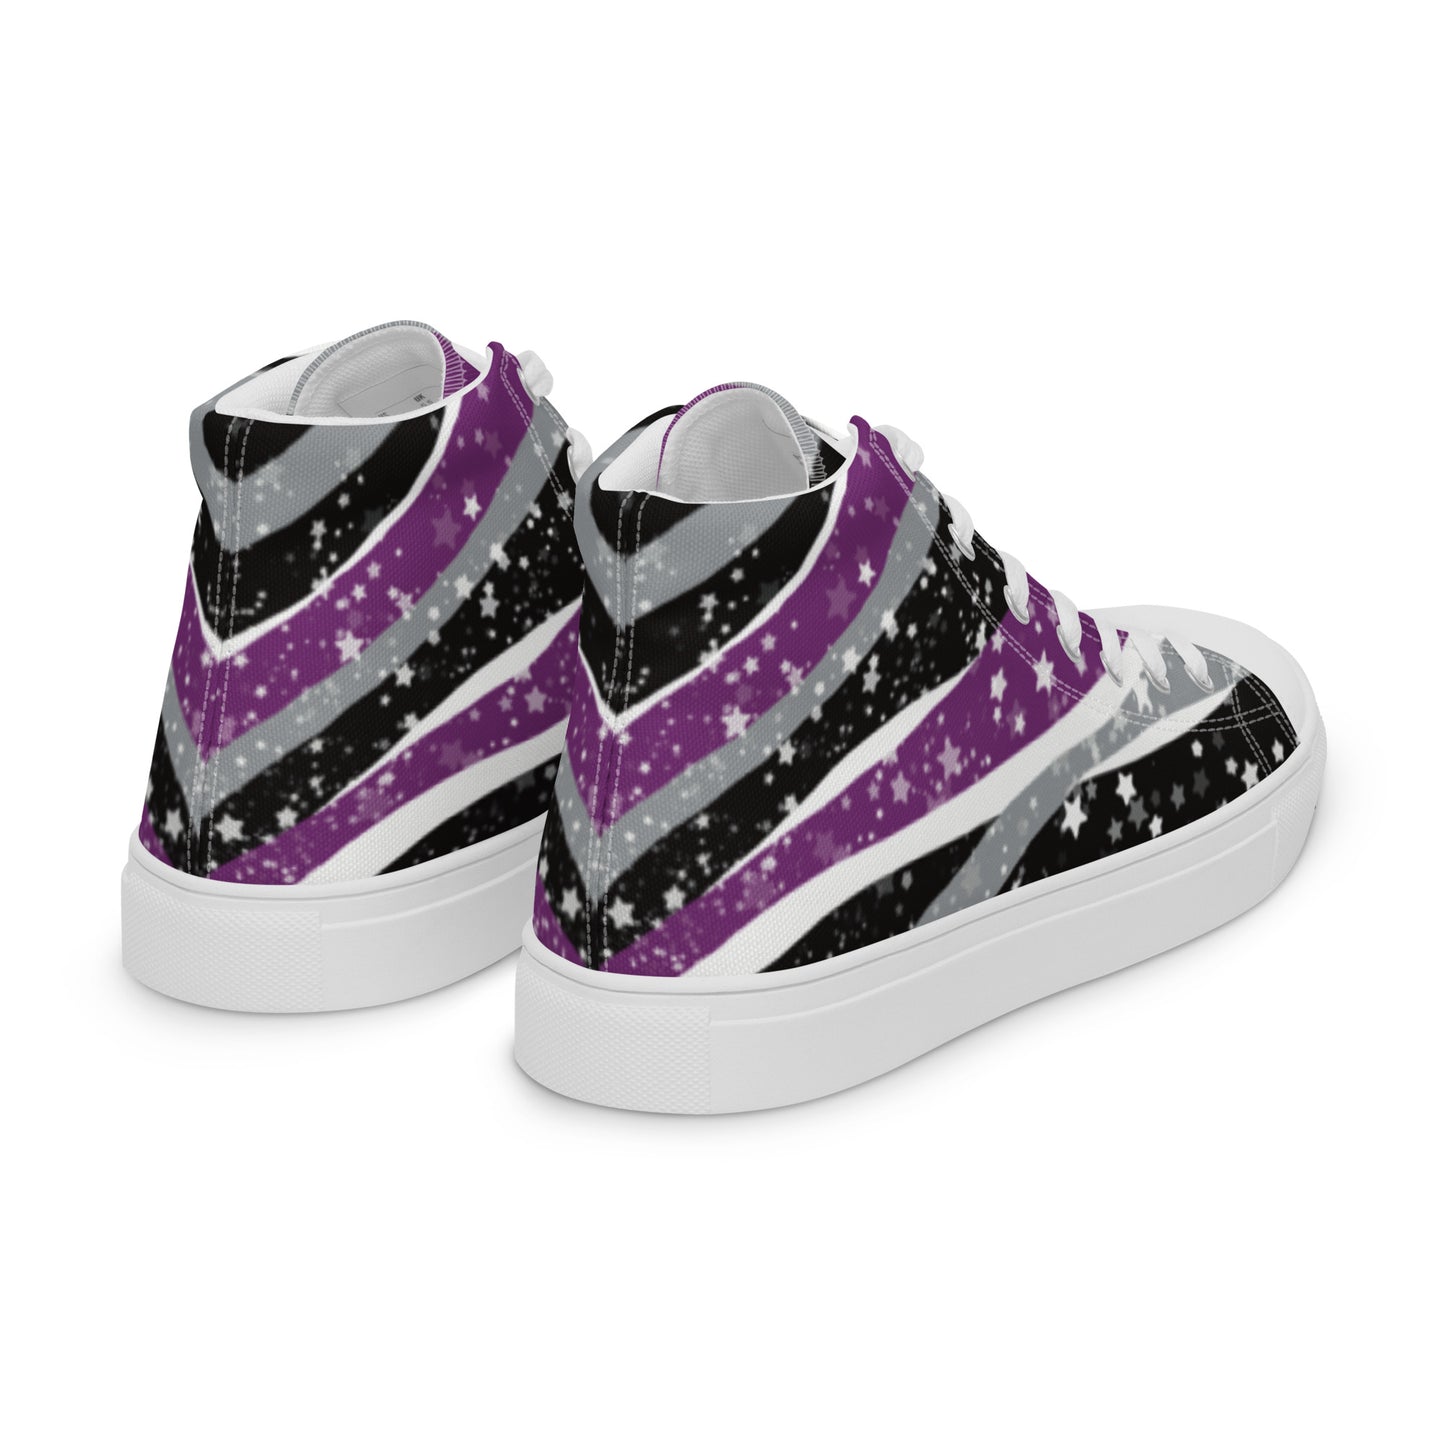 Right back view: a pair of high-top shoes with ribbons of purple, grey, black, and white seem to expand from the heel to the laces with an explosion of stars.